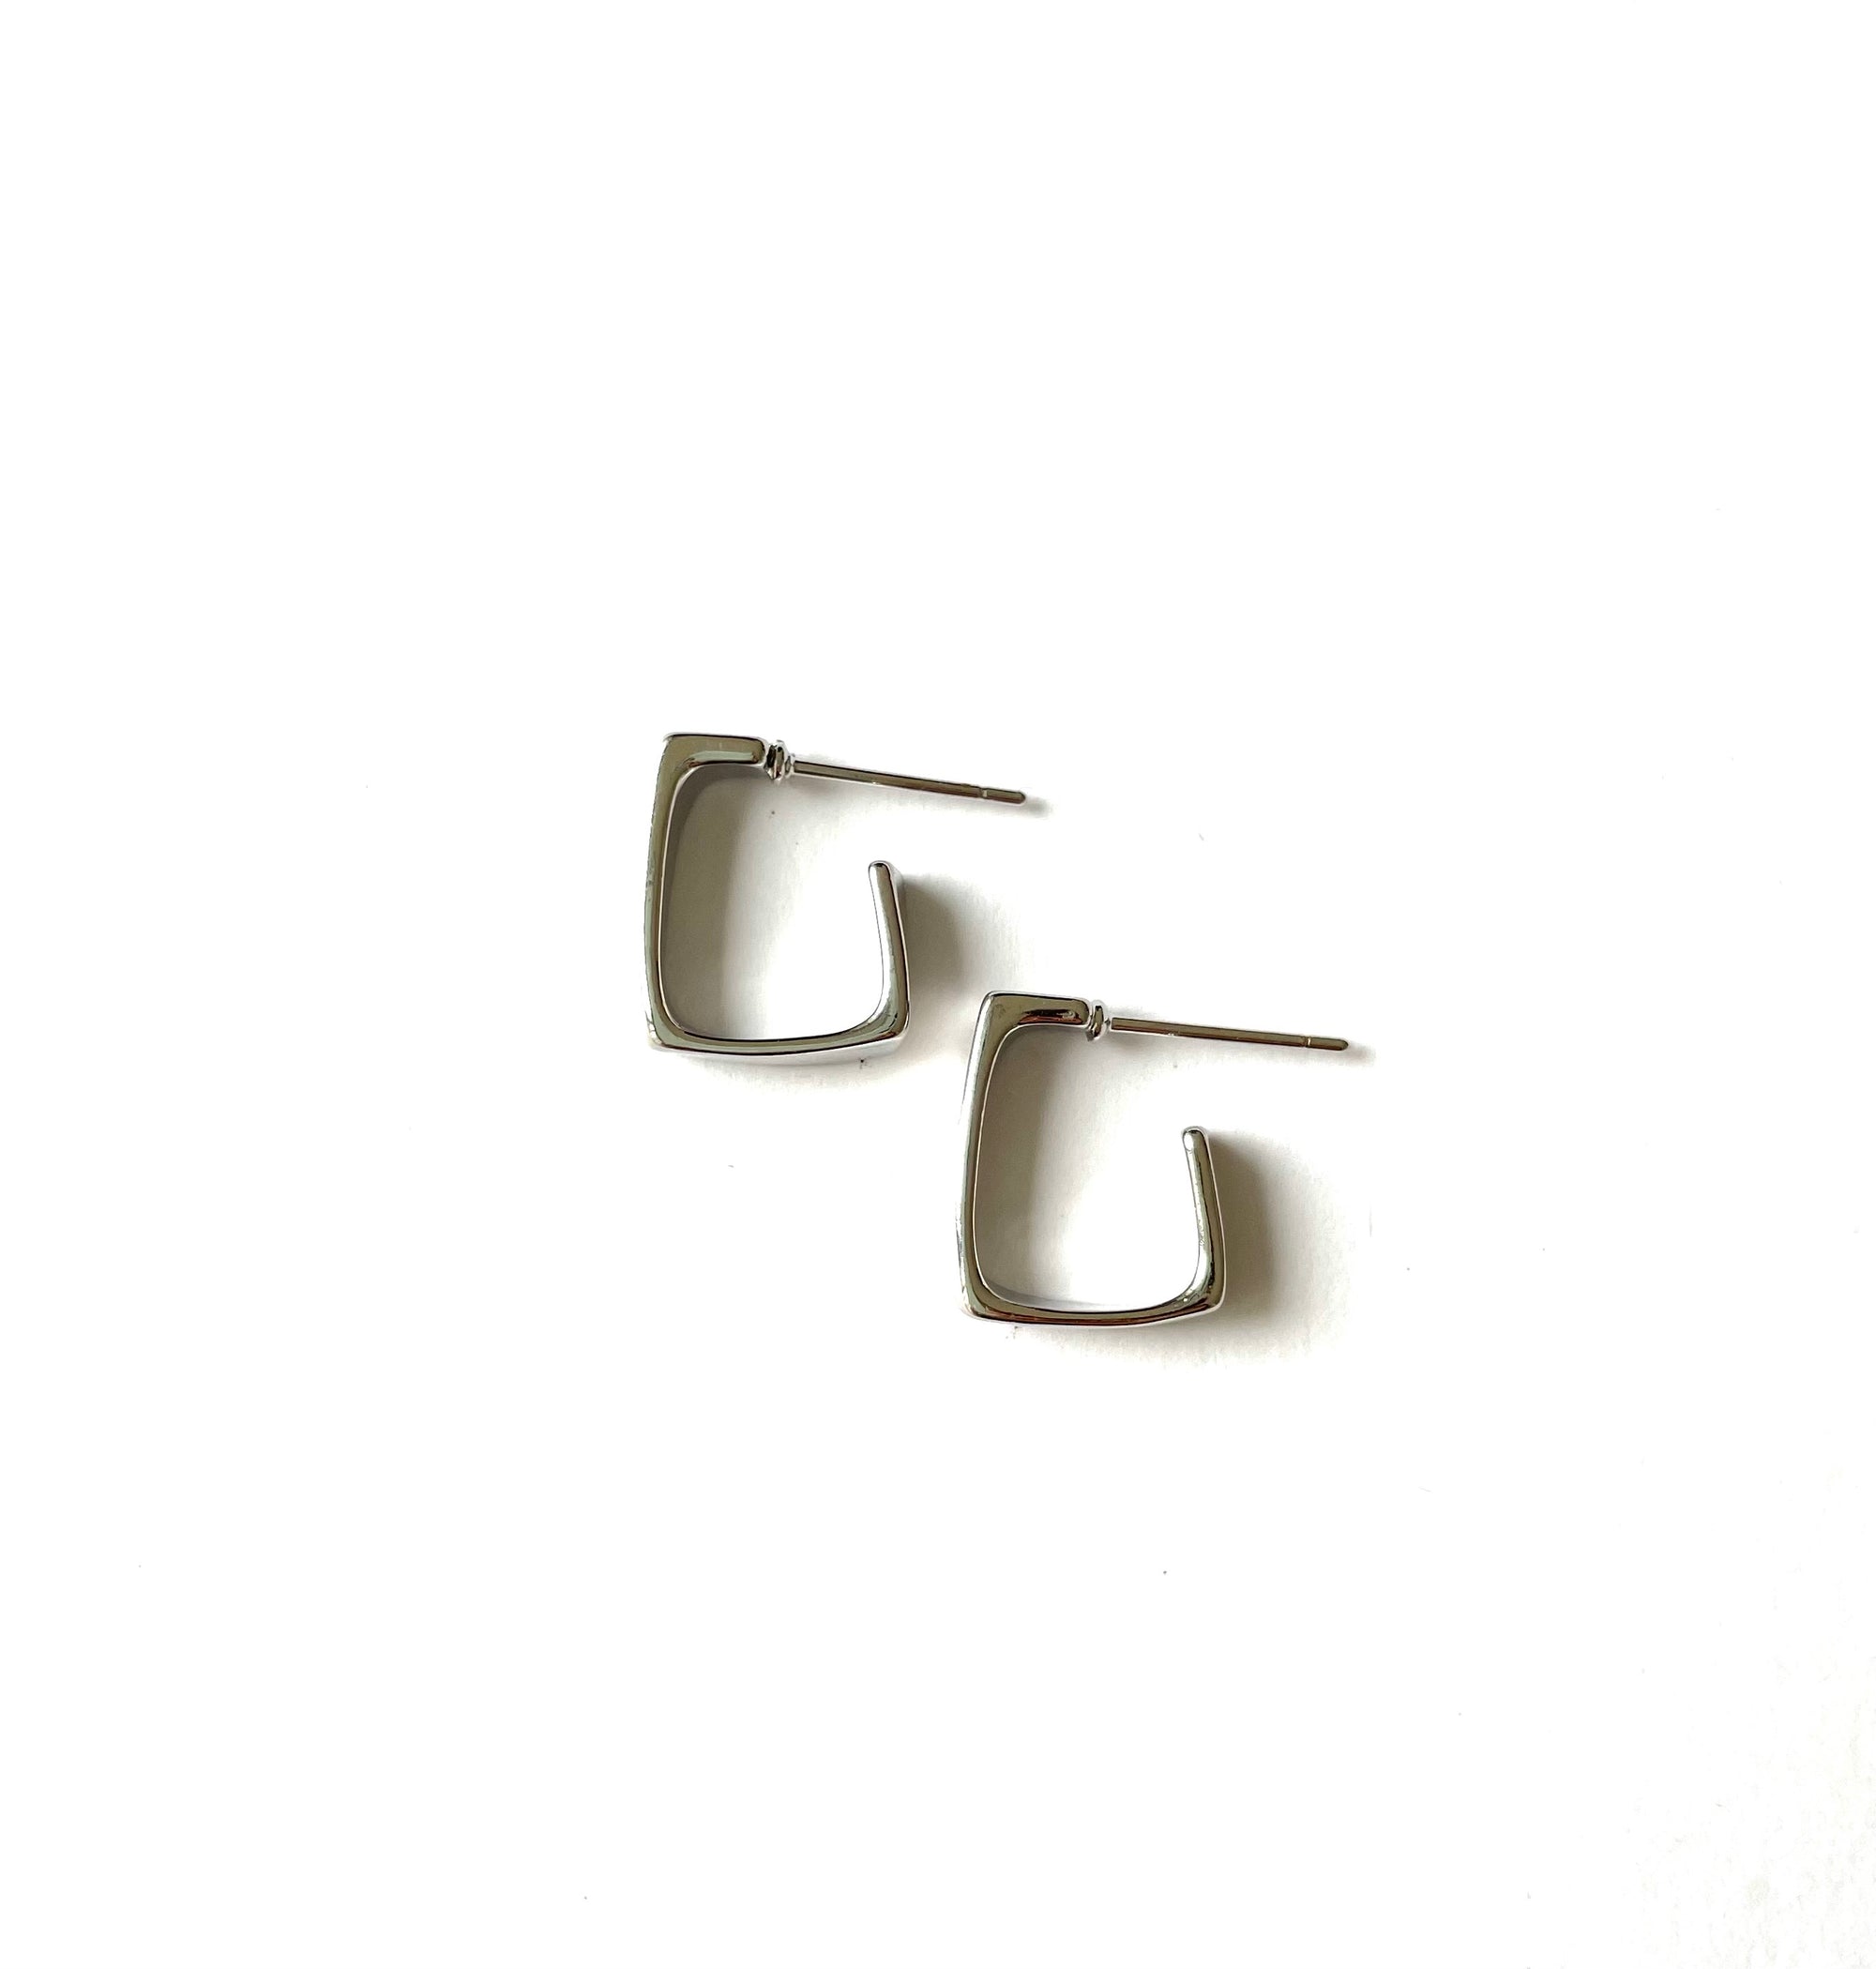 sophisticated small and dainty half open square shaped hoop earrings in a silver finish over italian brass